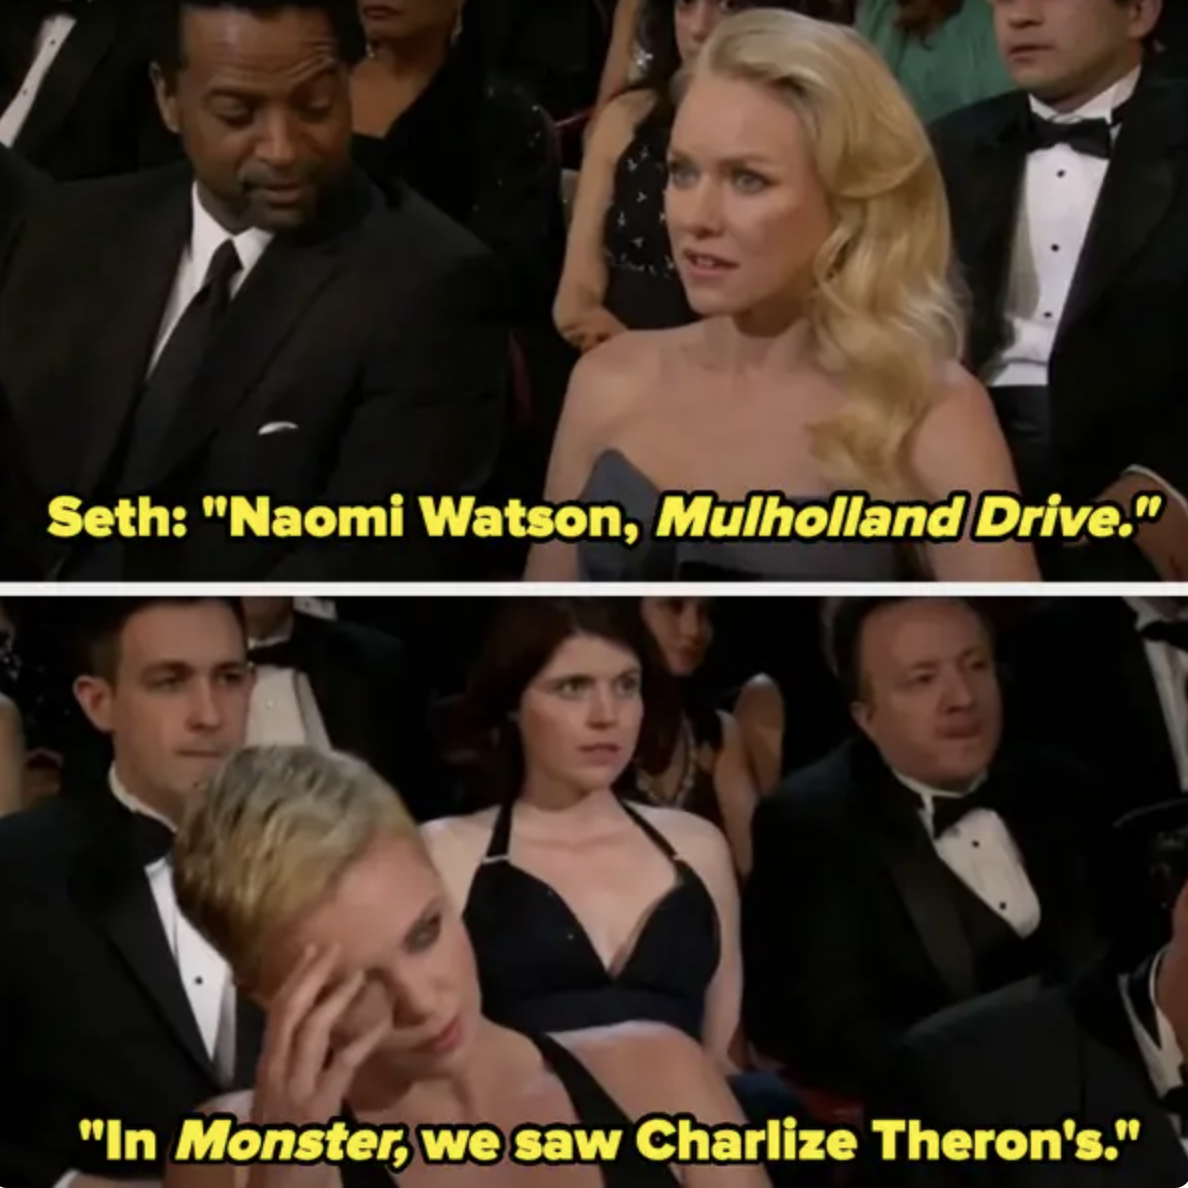 Naomi Watson and Charlize Theron appear uncomfortable